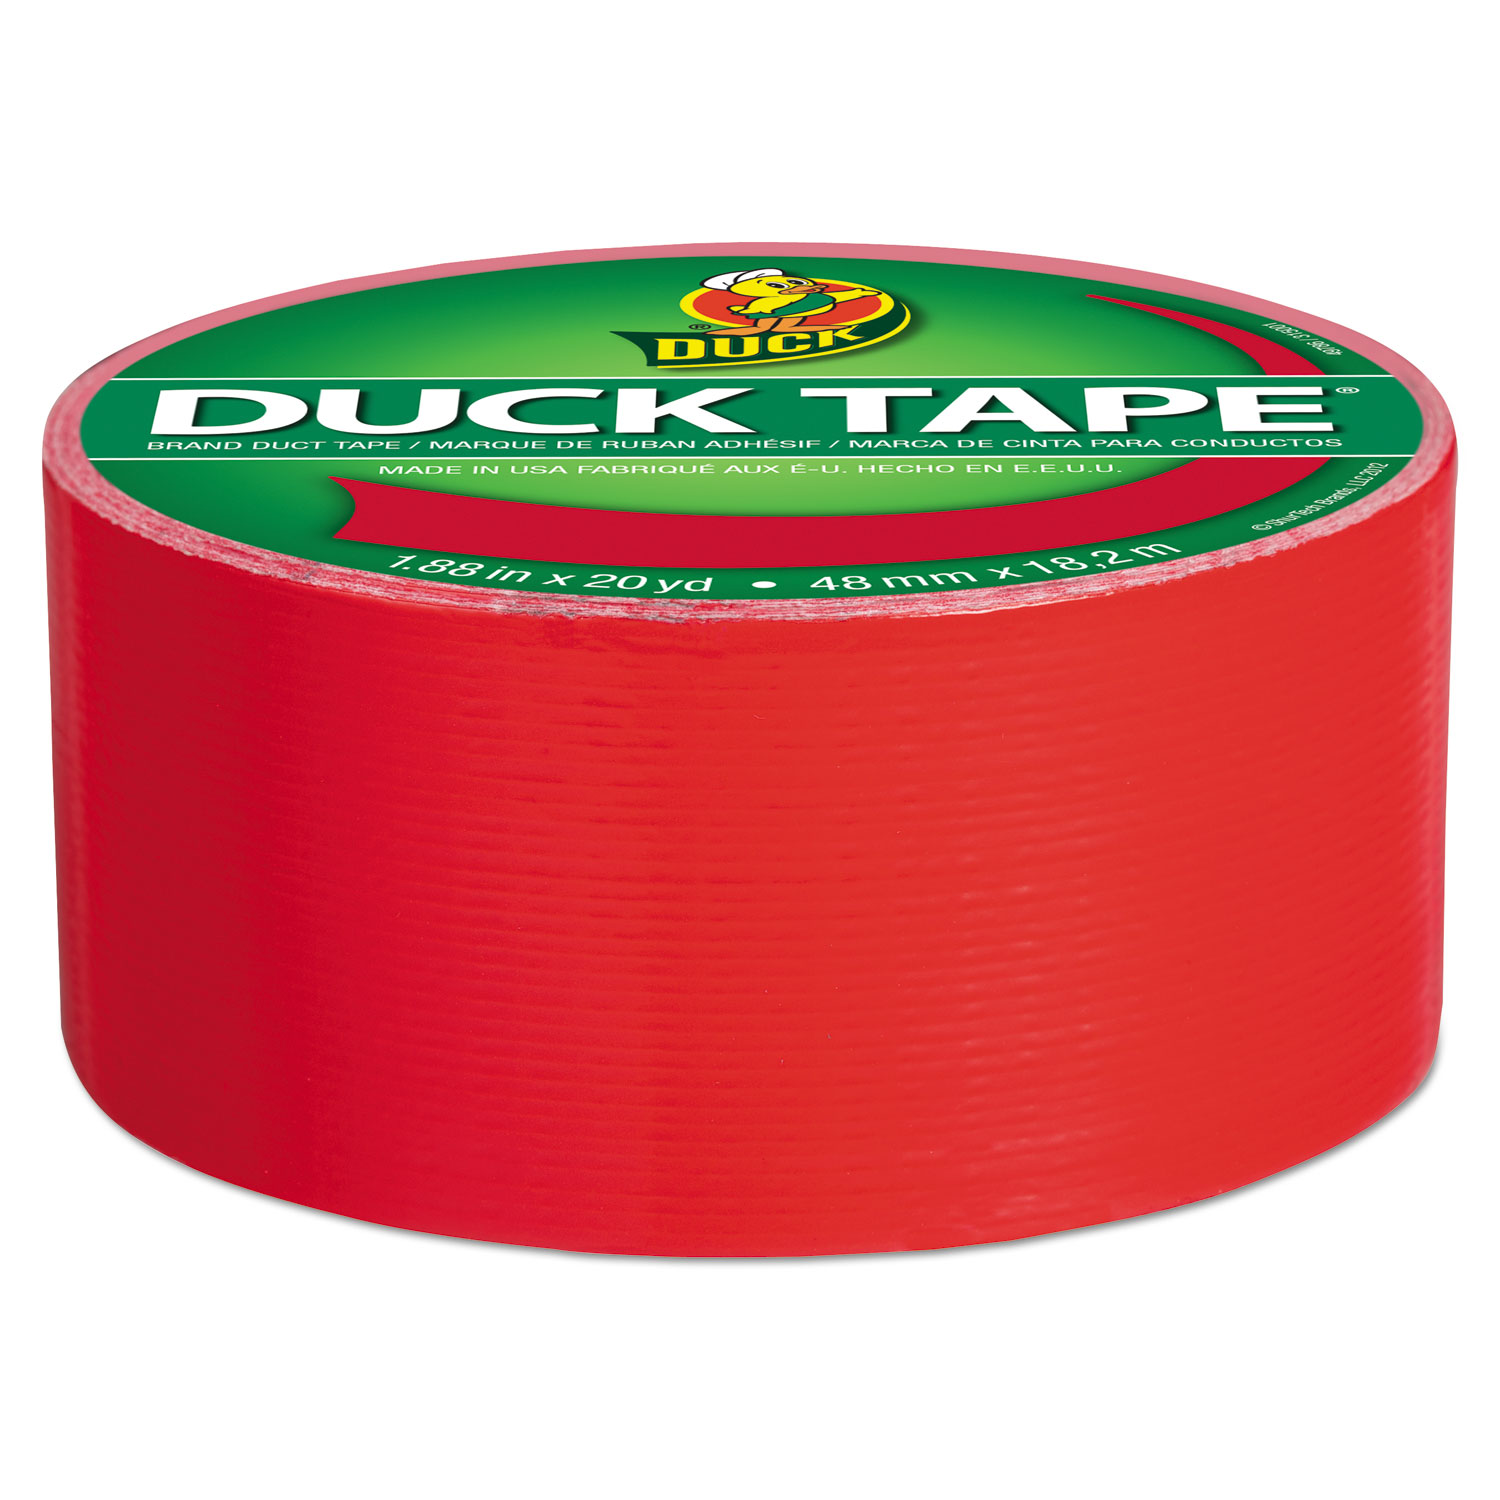 Duct Tape for Projects